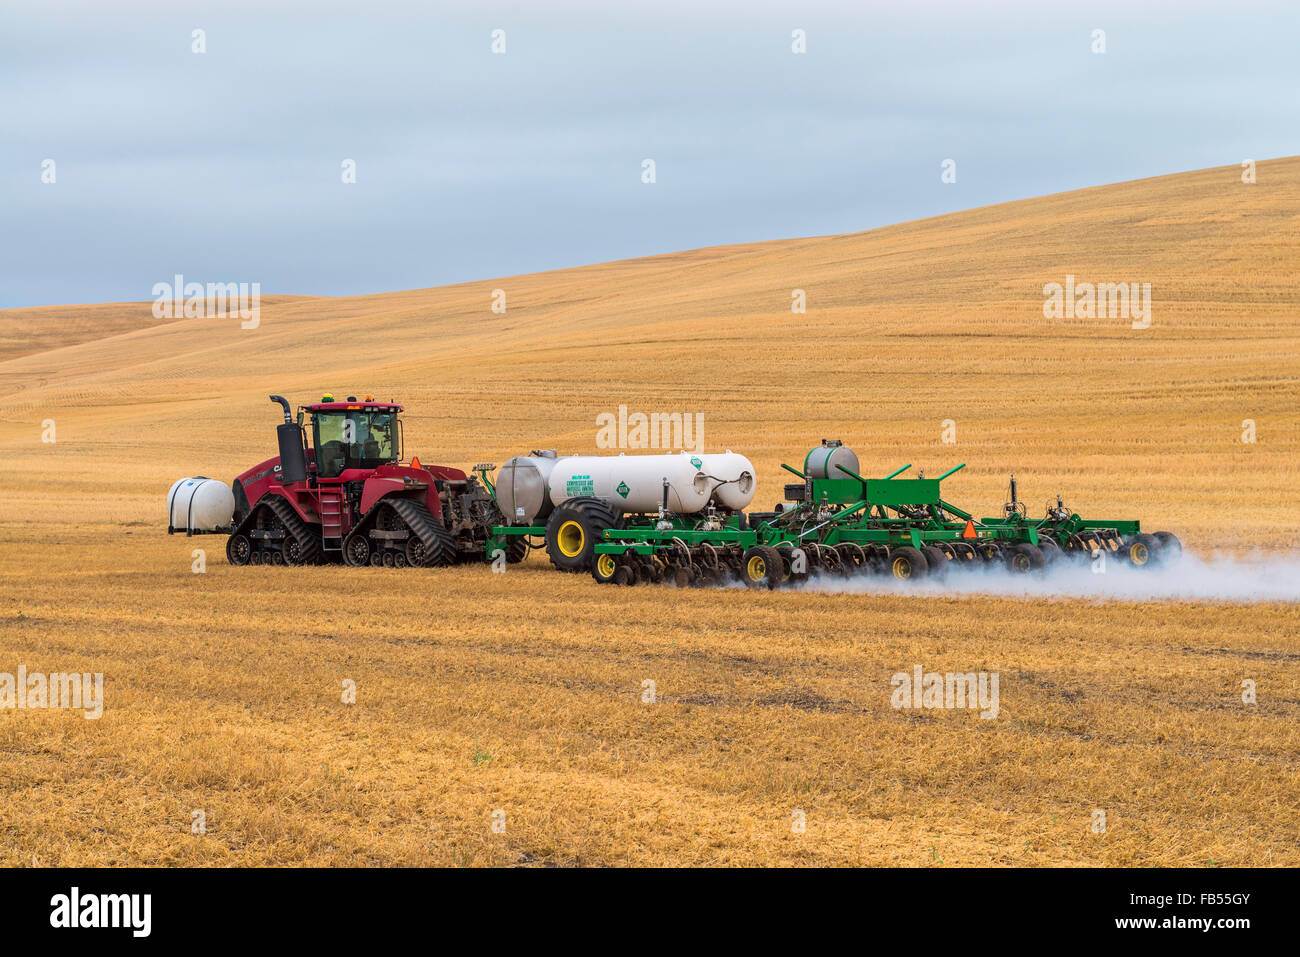 Case quadtrac tractor pulling an anhydrous ammonia tank and applicator applying the anhydrous to a field in advance of preparing Stock Photo